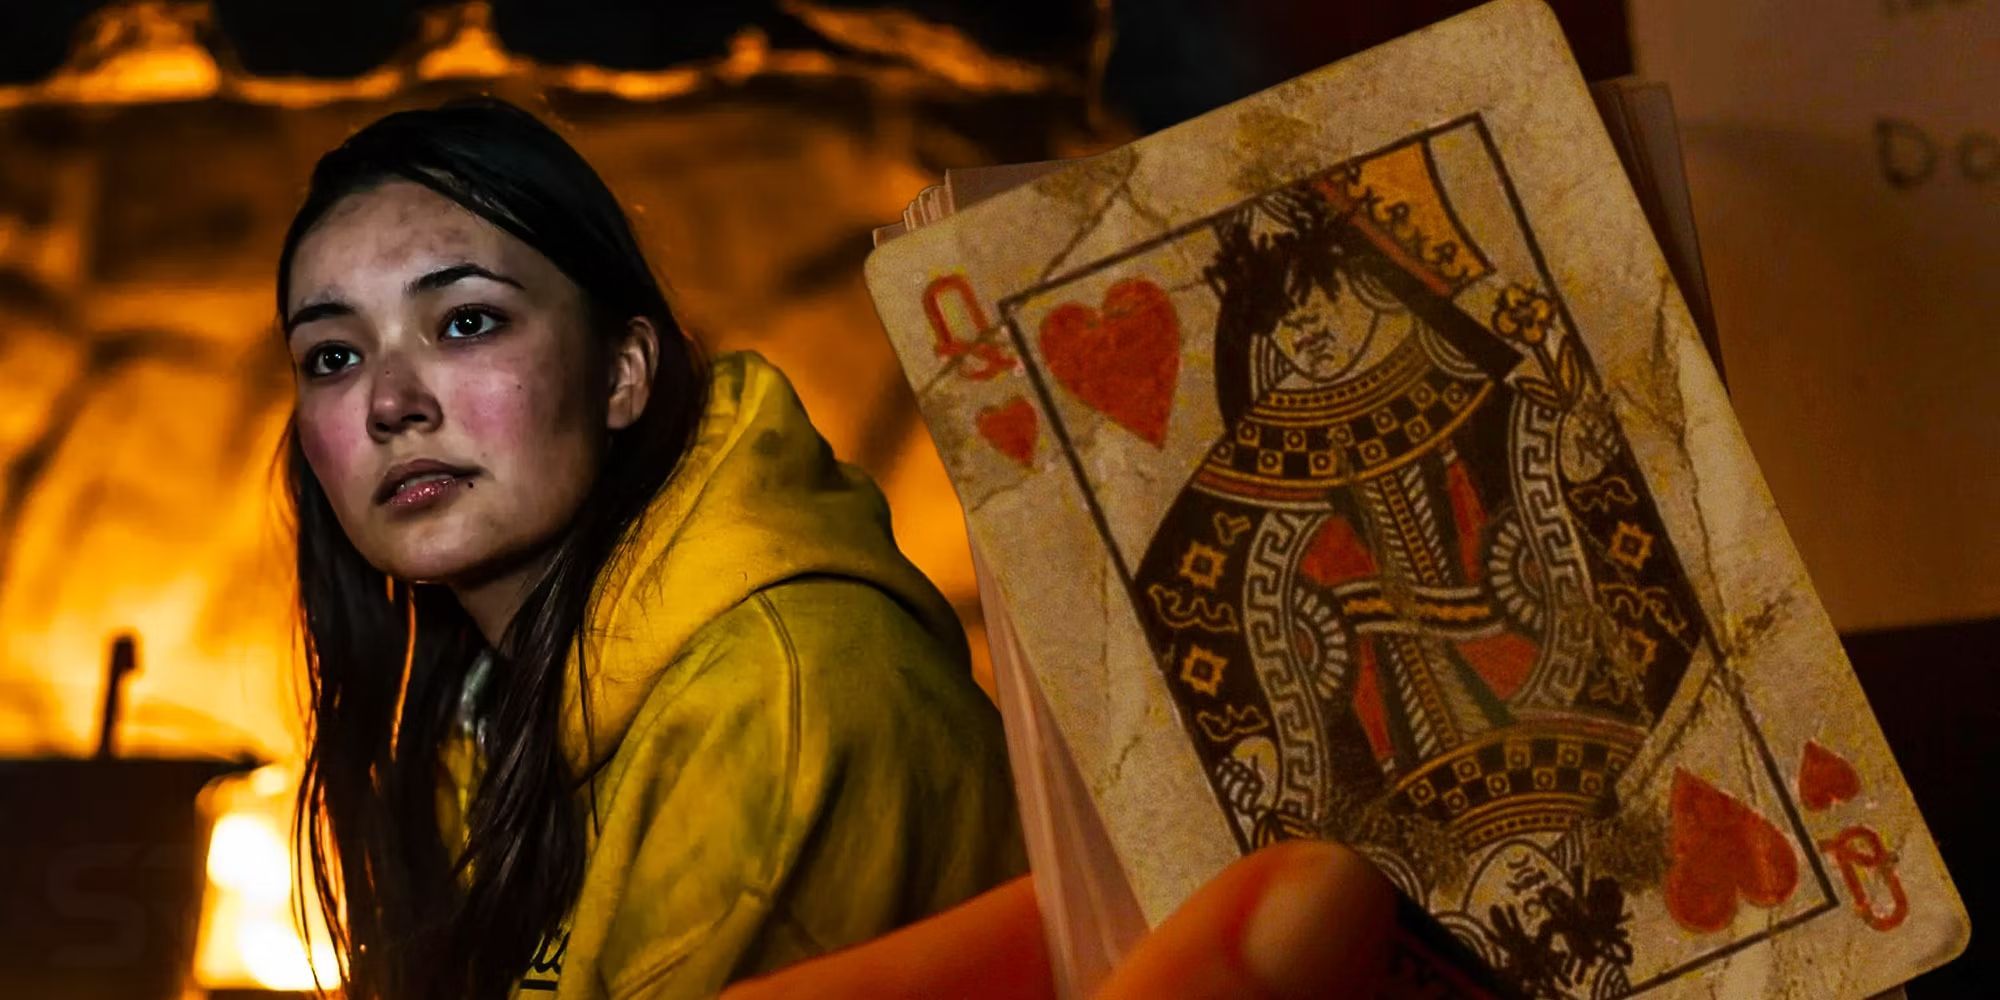 A blended image features Mari and the Queen of Hearts playing card from Yellowjackets